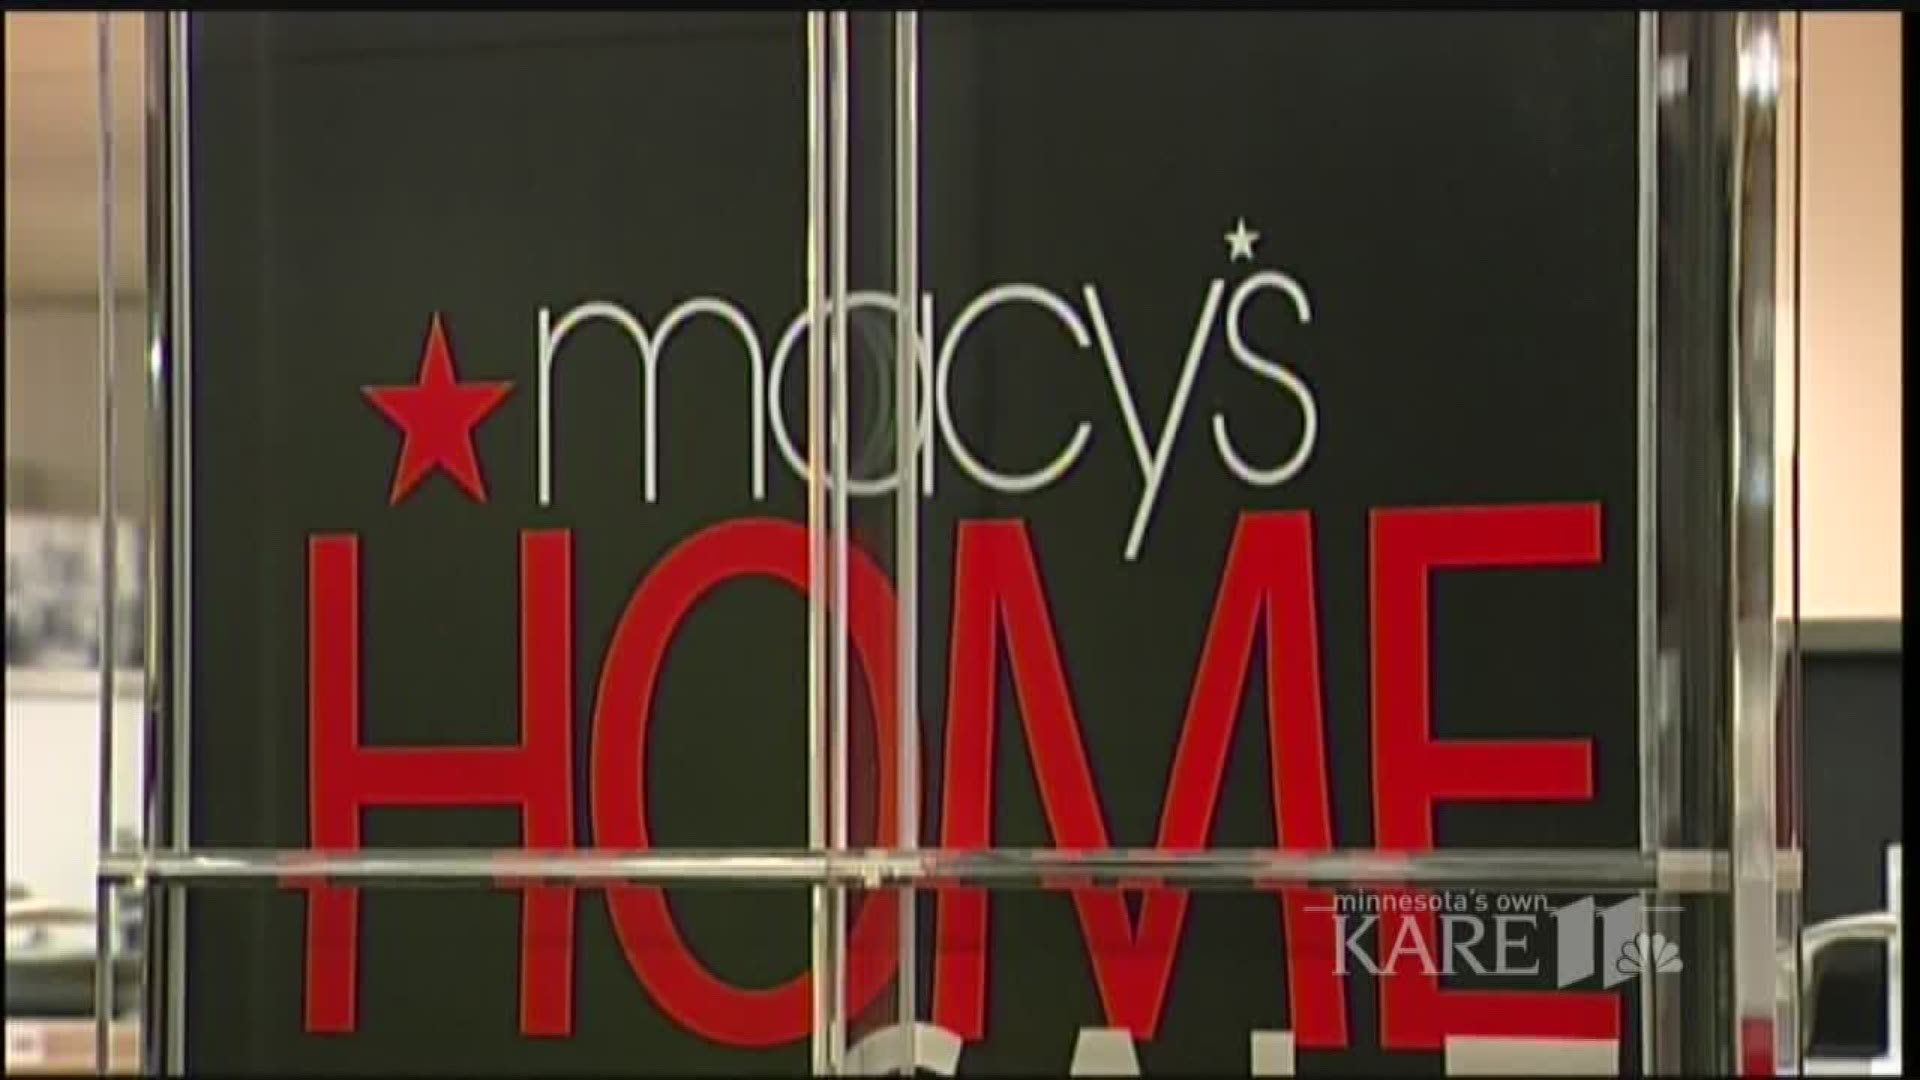 The history of the Macy's building